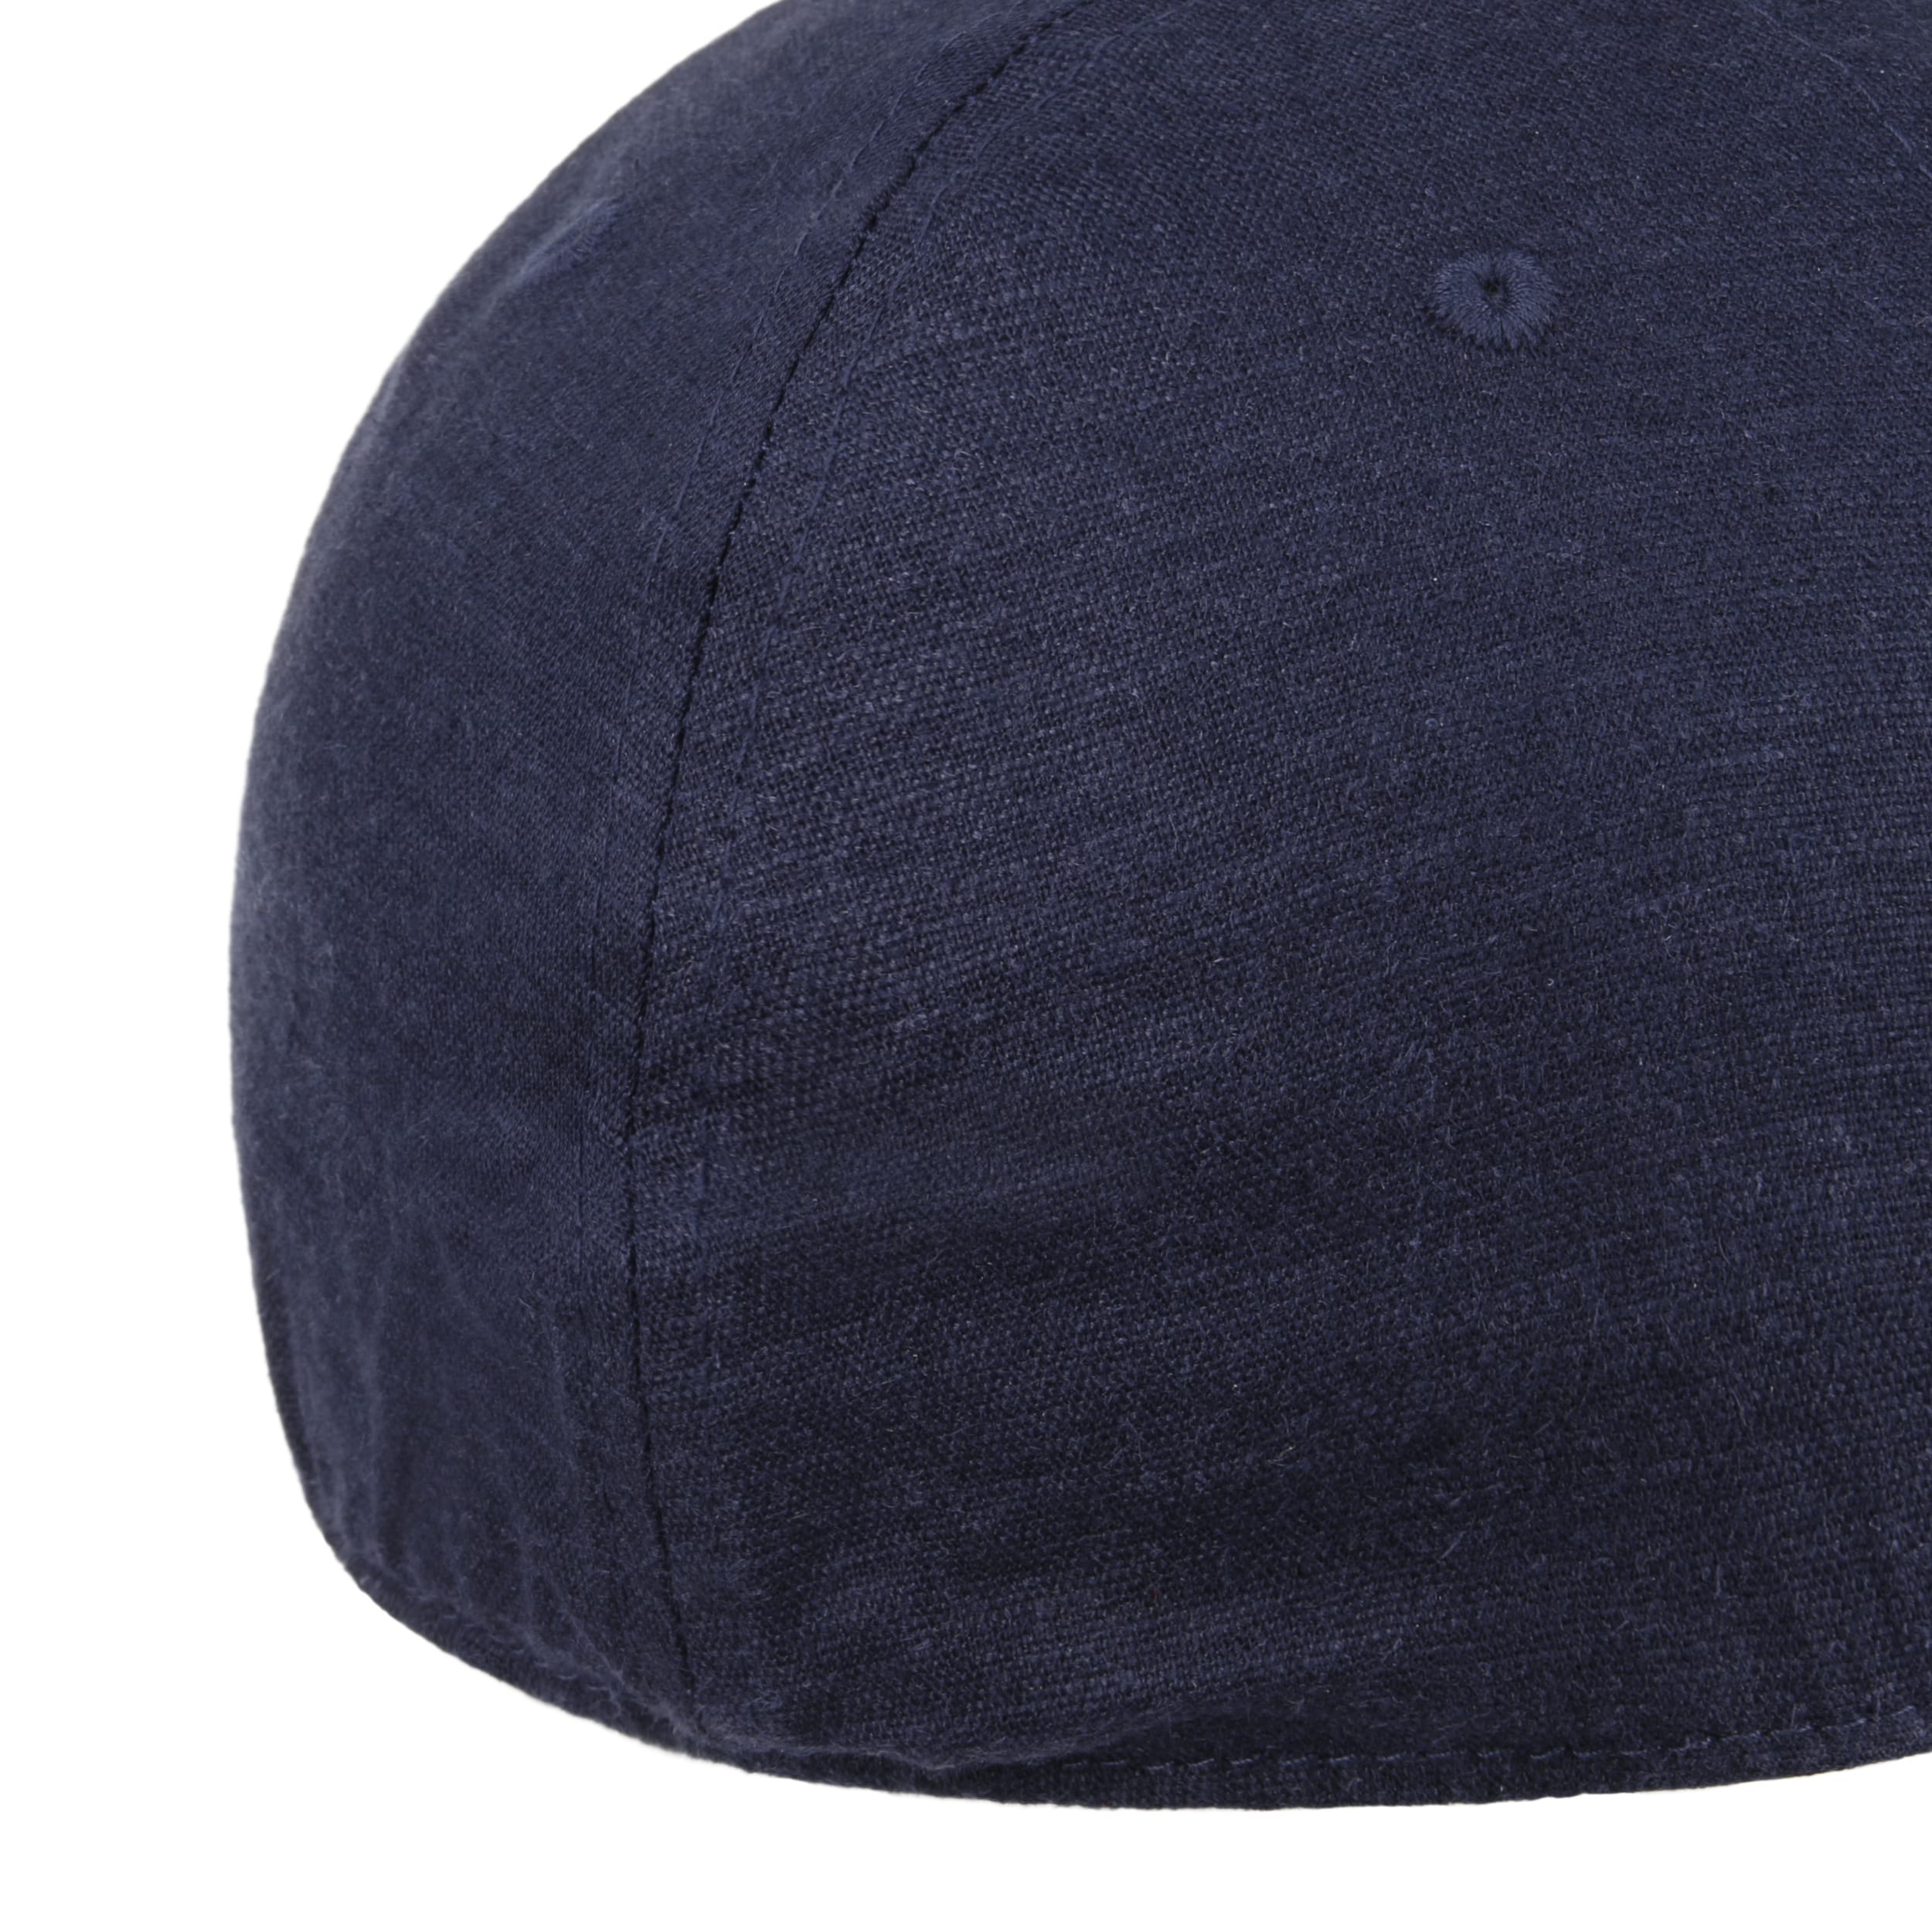 Linen - Sao 26,95 Chillouts by Paolo € Cap